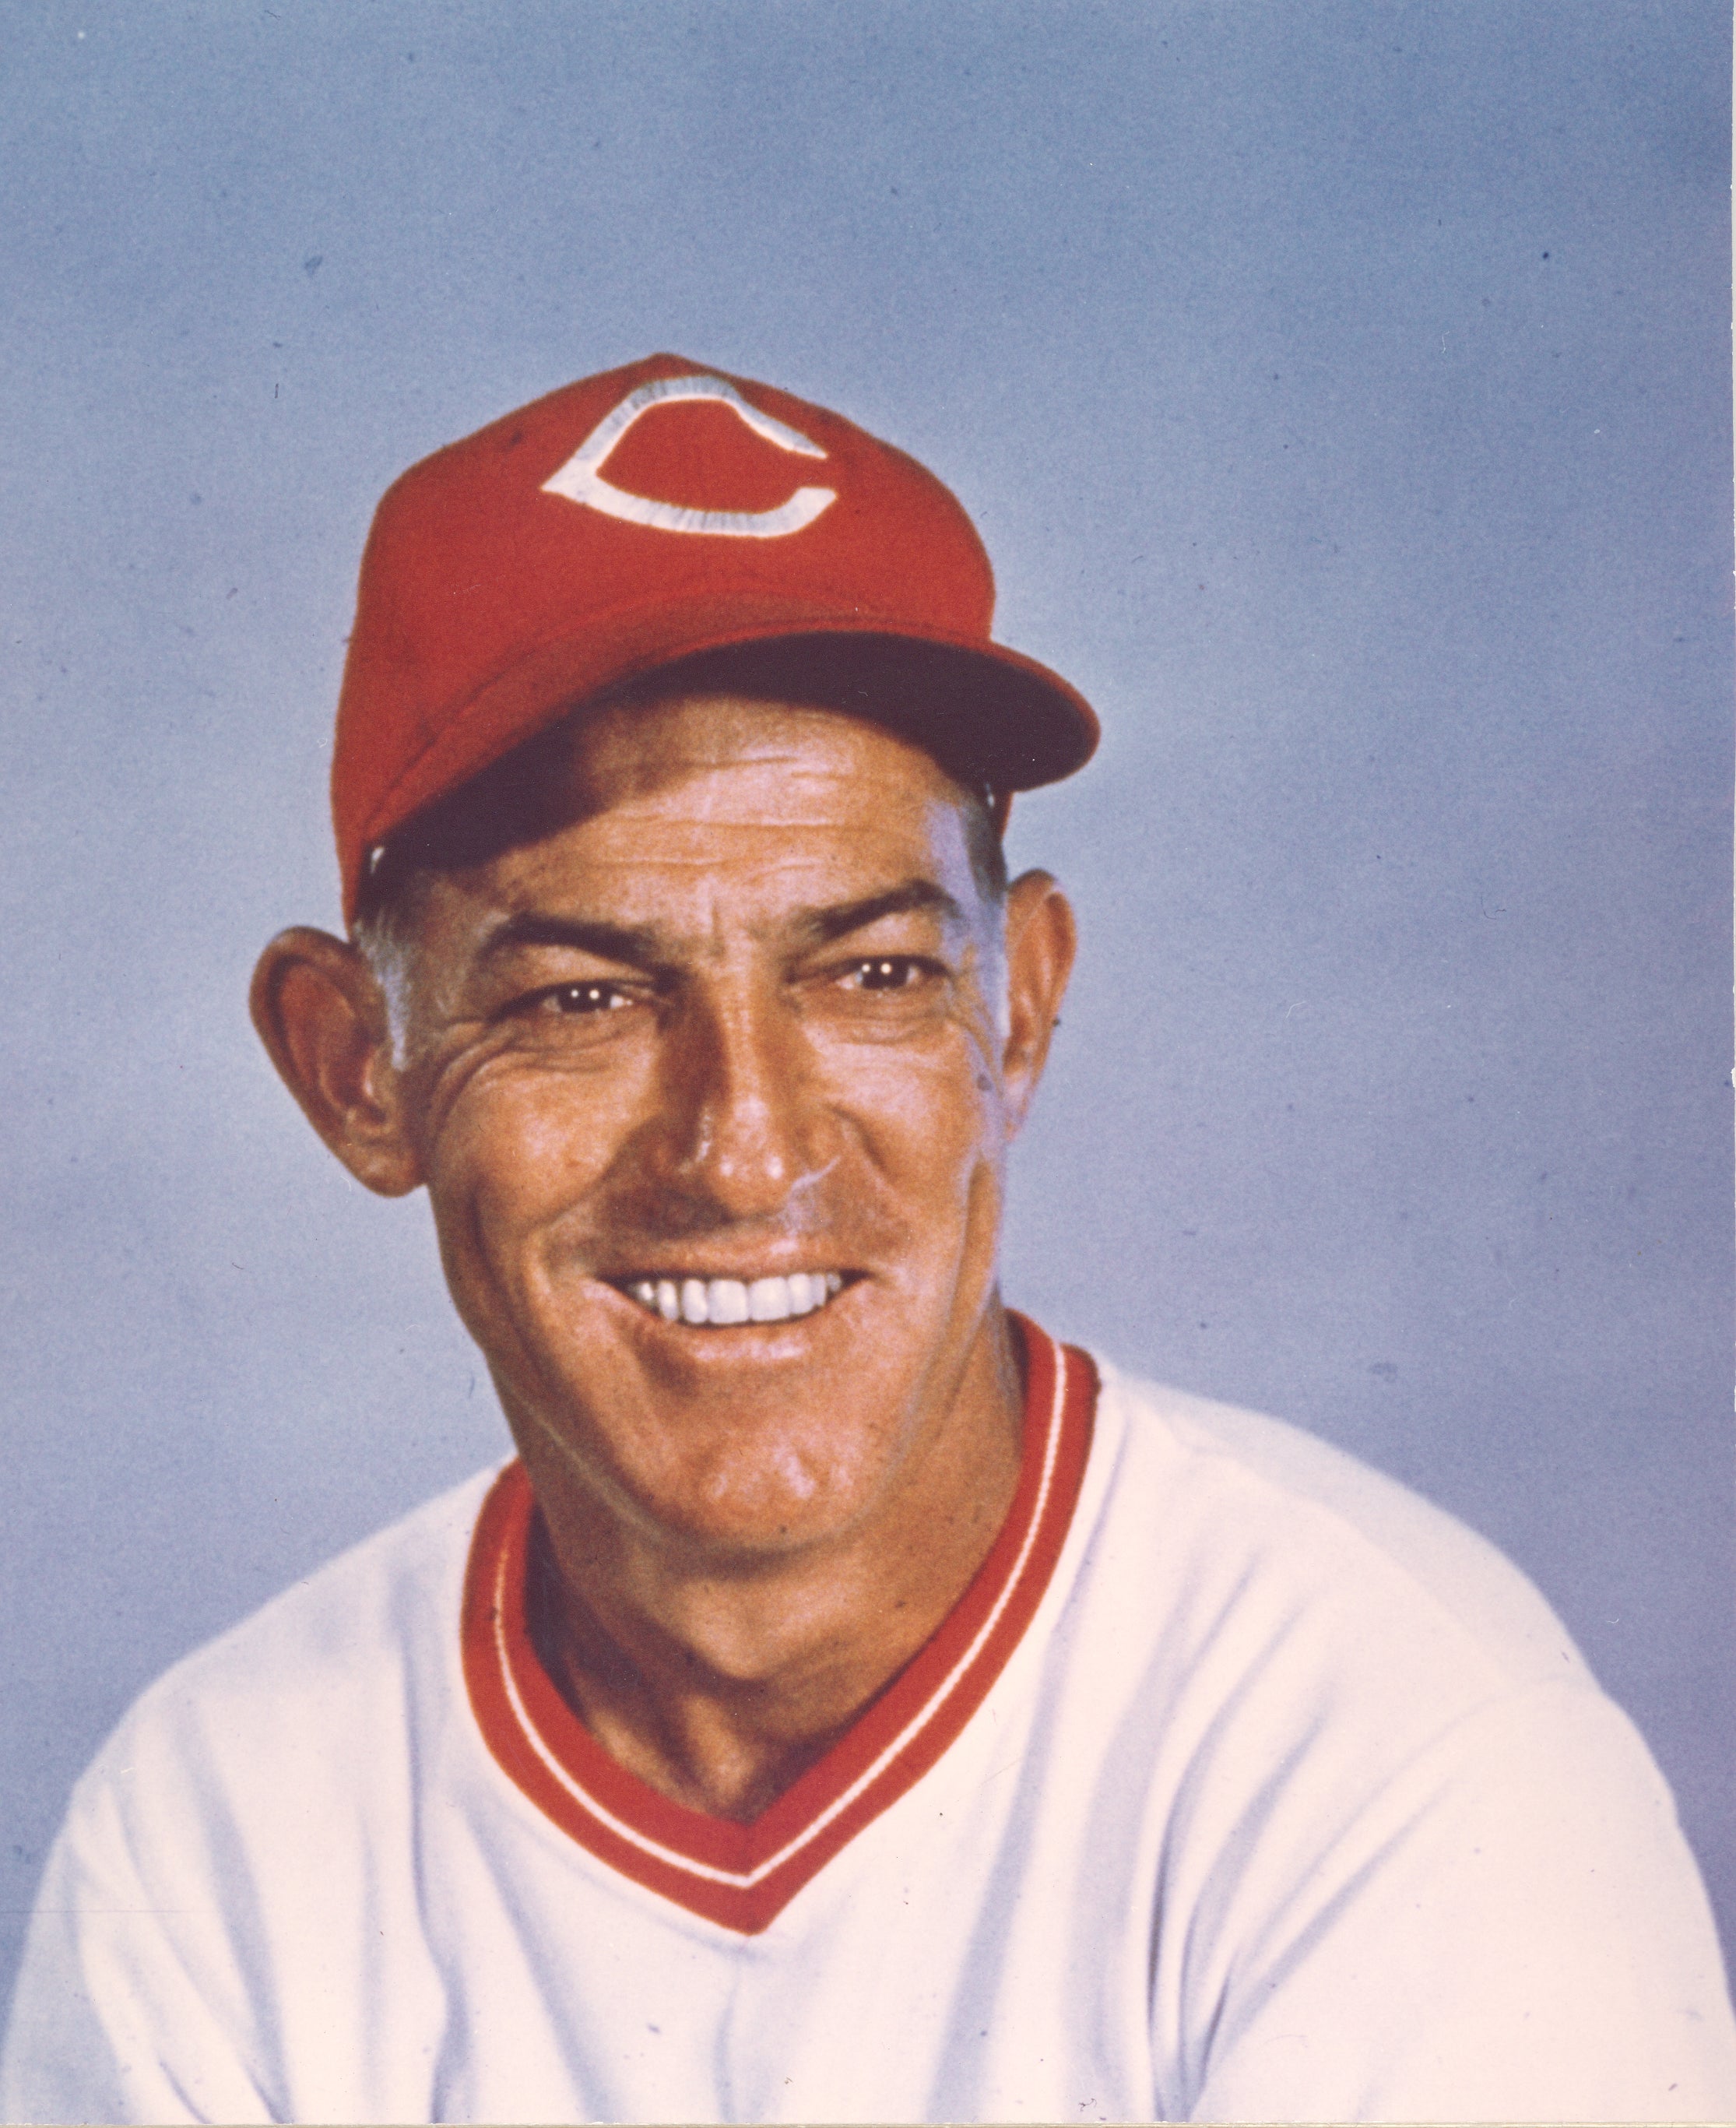 sparky anderson old